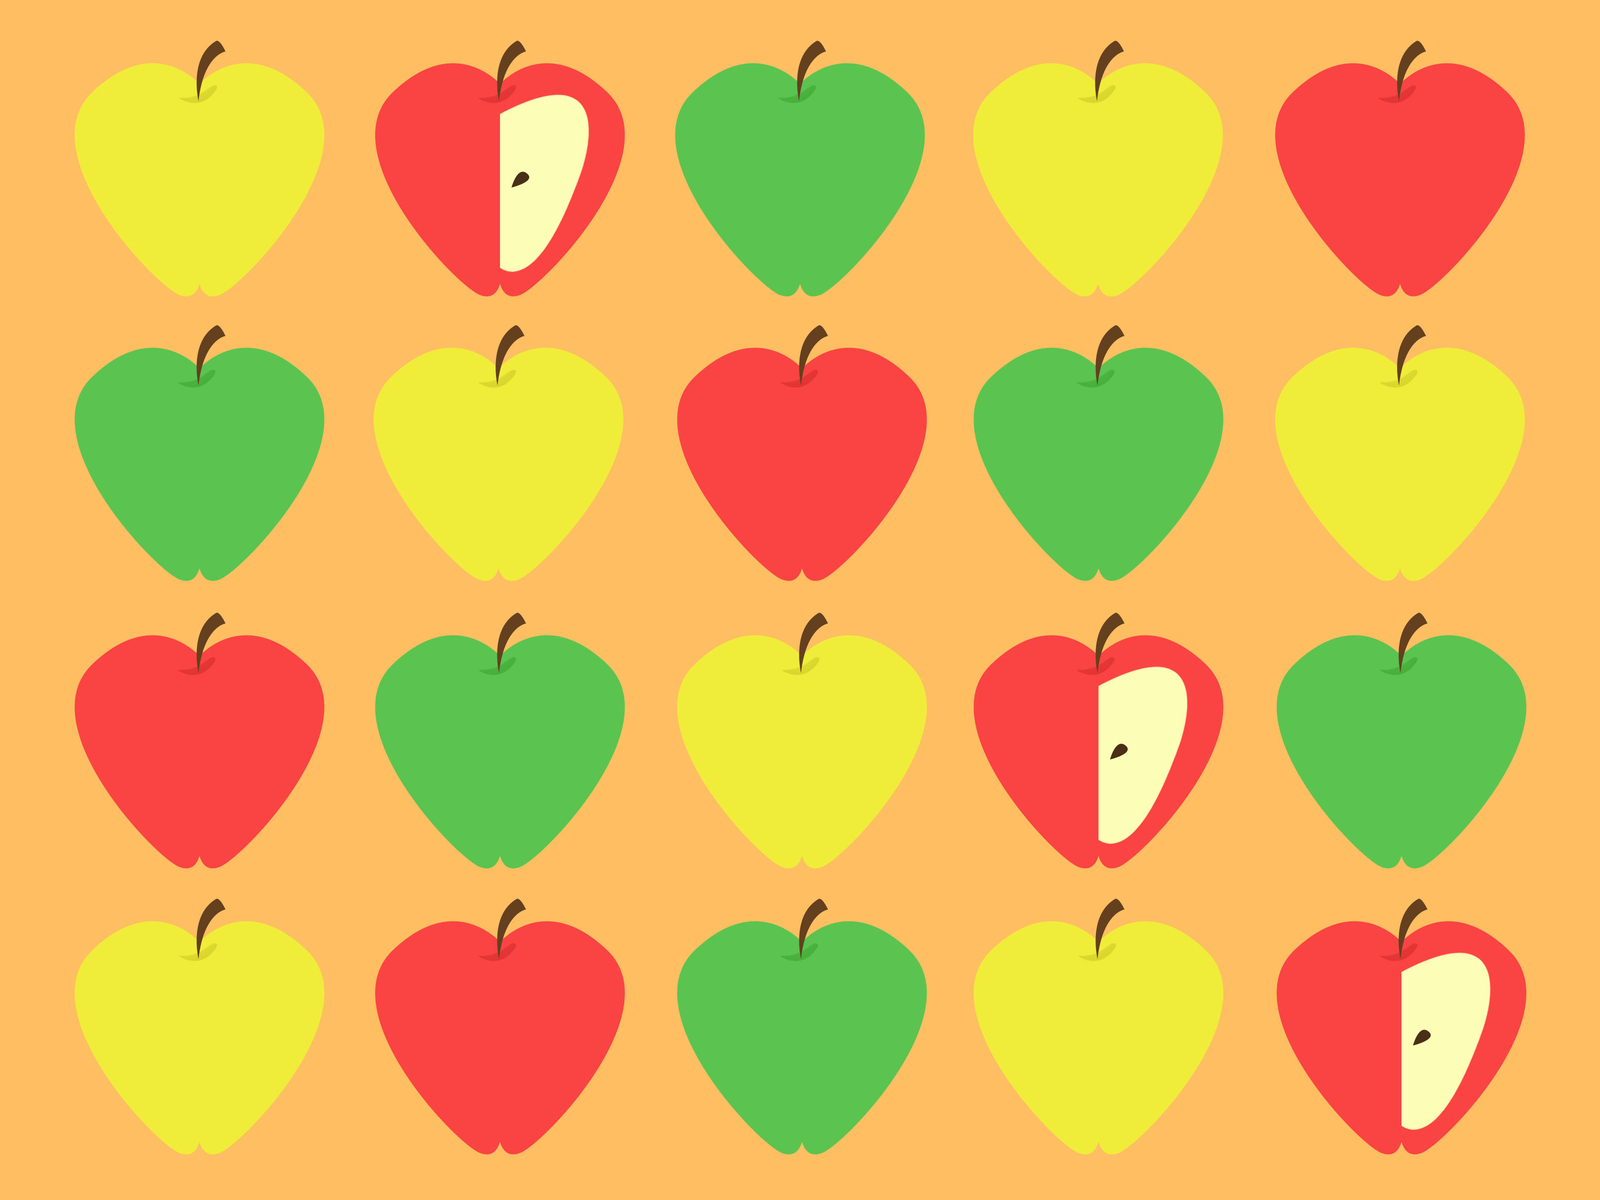 apple-print-by-fadelessred-on-dribbble